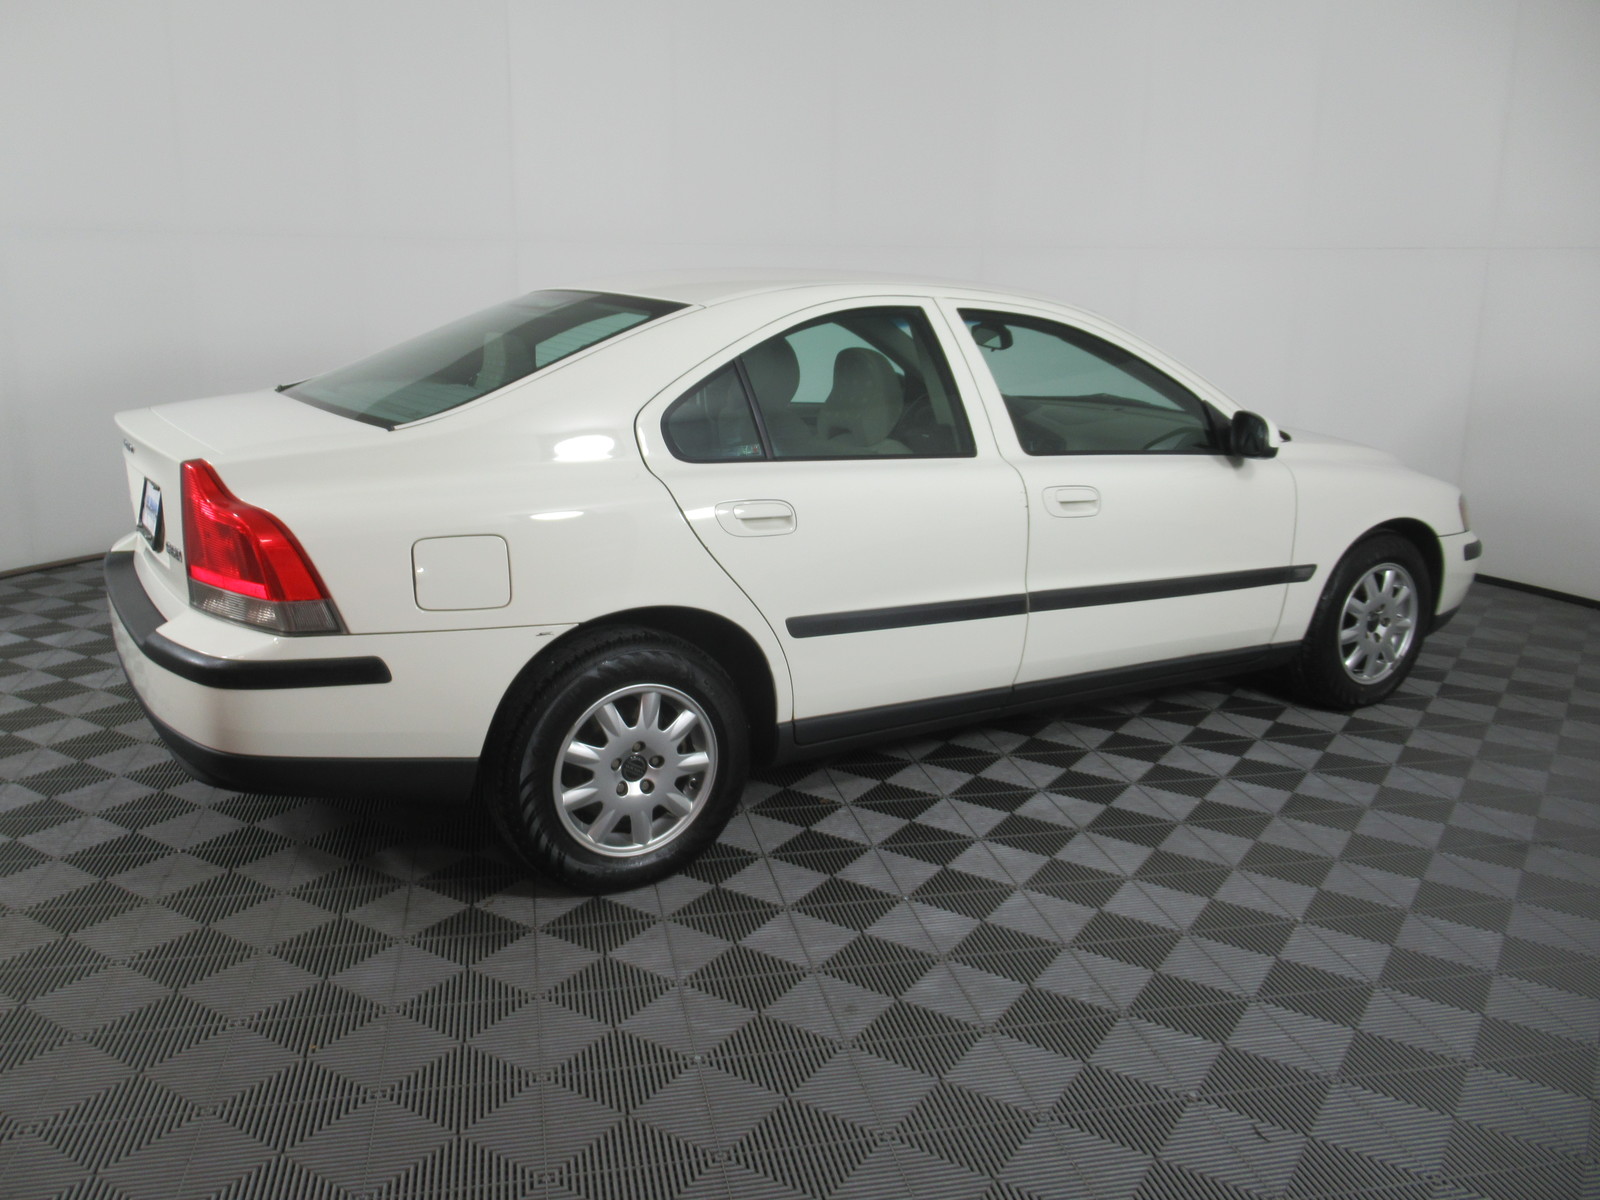 Pre-Owned 2002 Volvo S60 2.4 M 4dr Sdn Manual 4dr Car in Savoy #S20076A